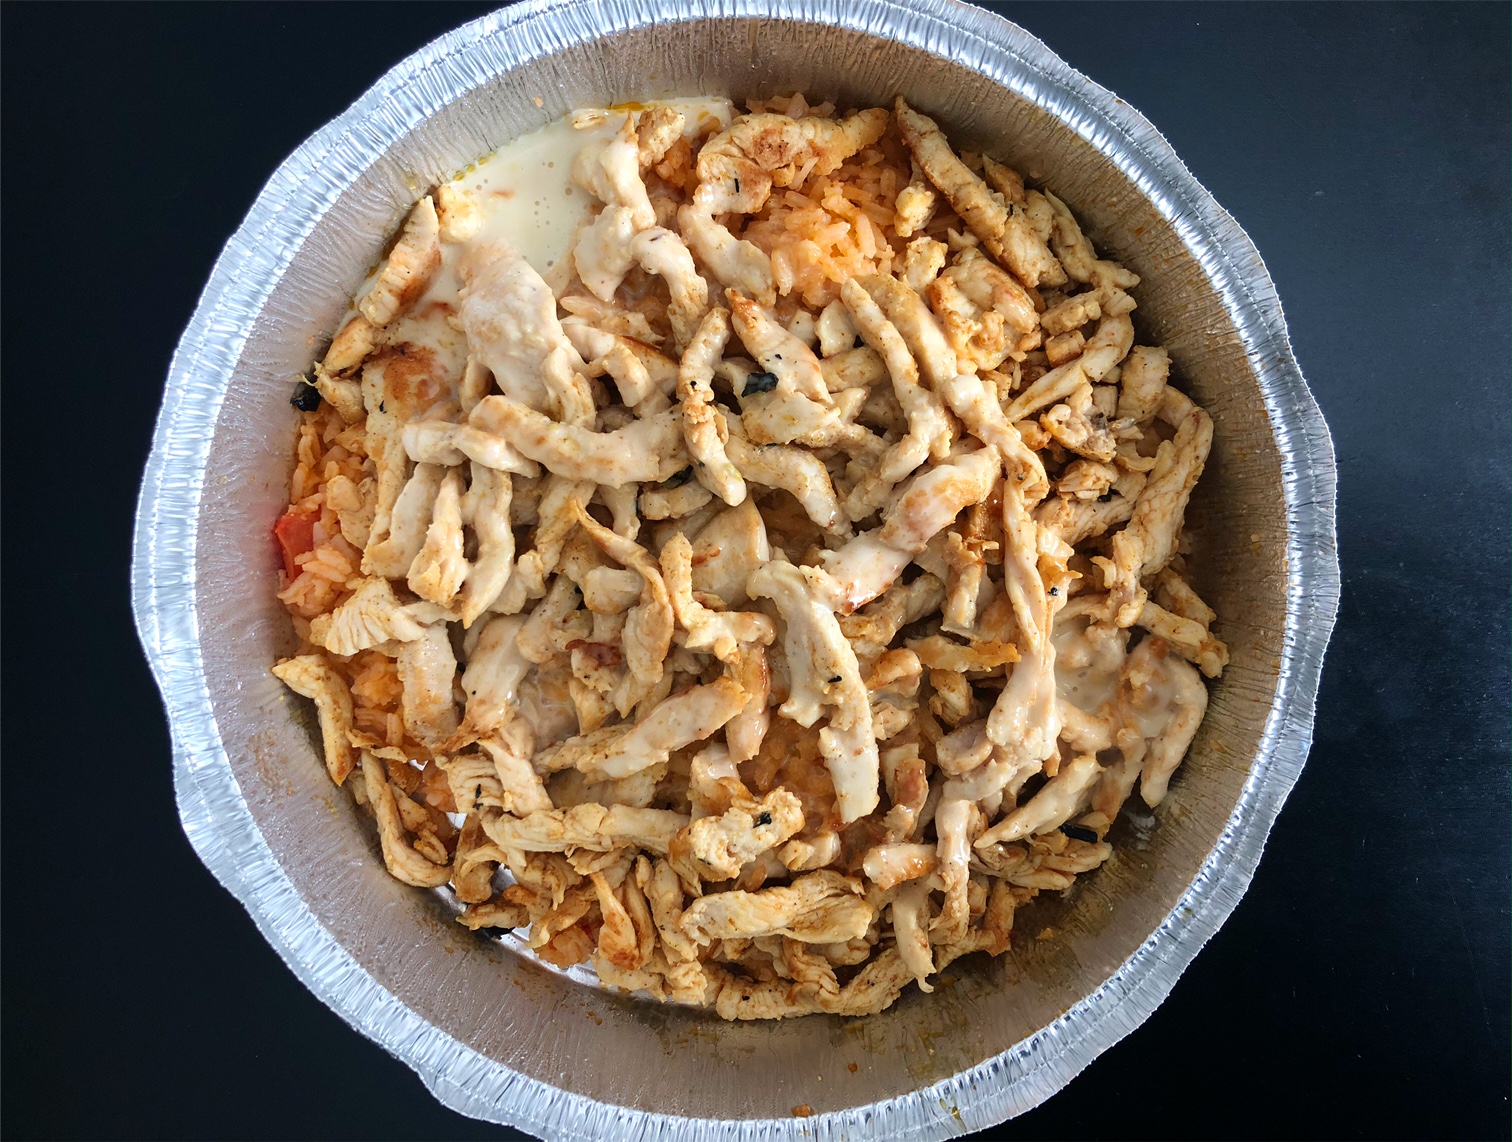 In a metal pie pan, there is a lot of thinly sliced chicken over Mexican rice on a black table. Photo by Alyssa Buckley.